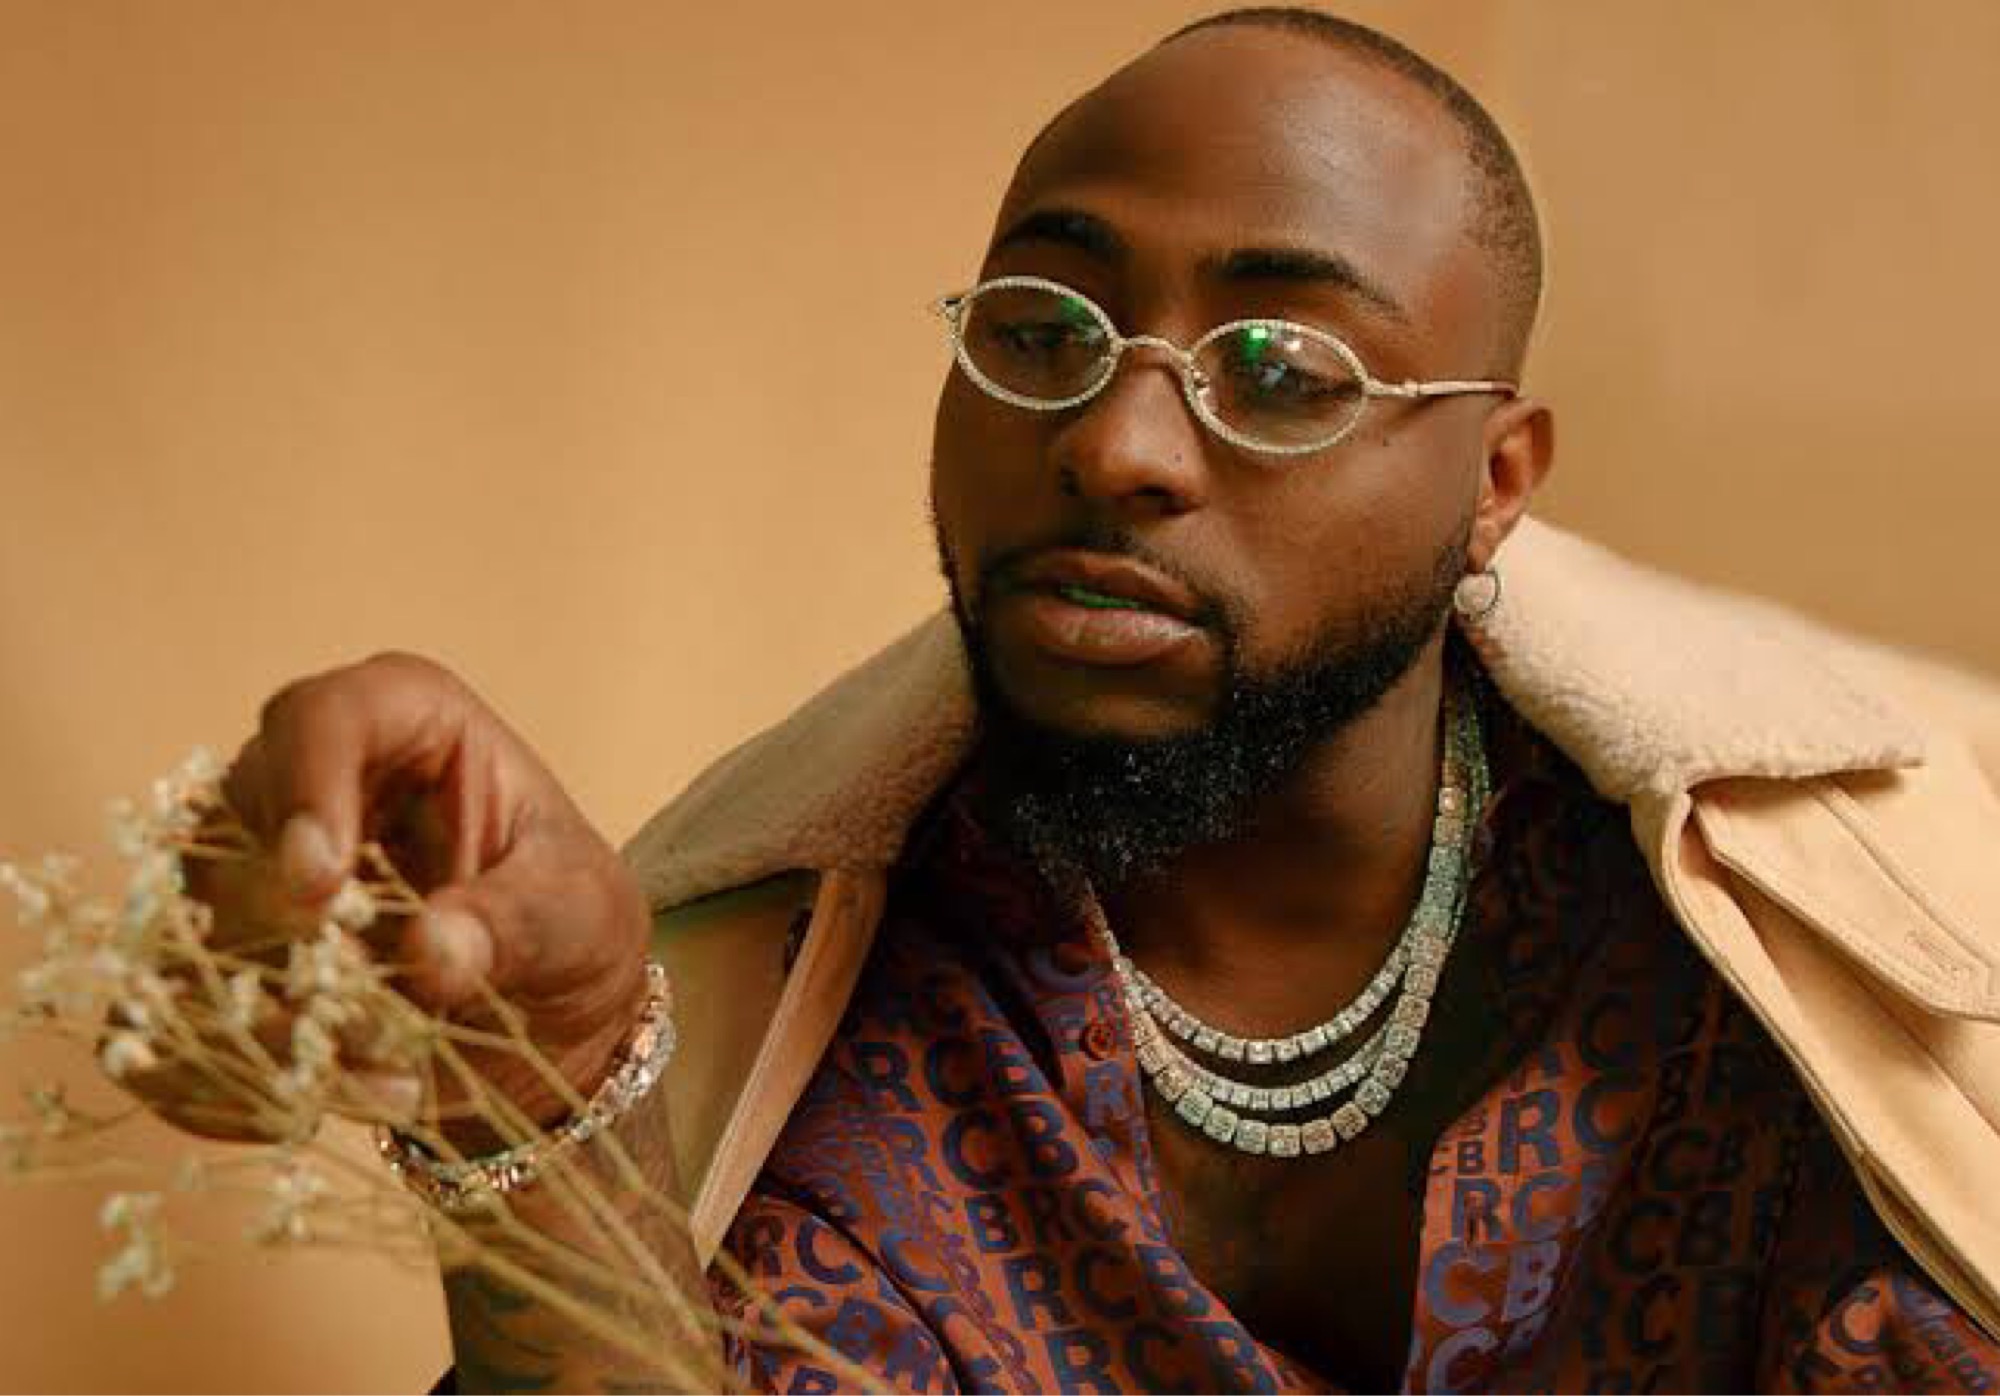 Davido's 'A Better Time' Album To Be Released November 13